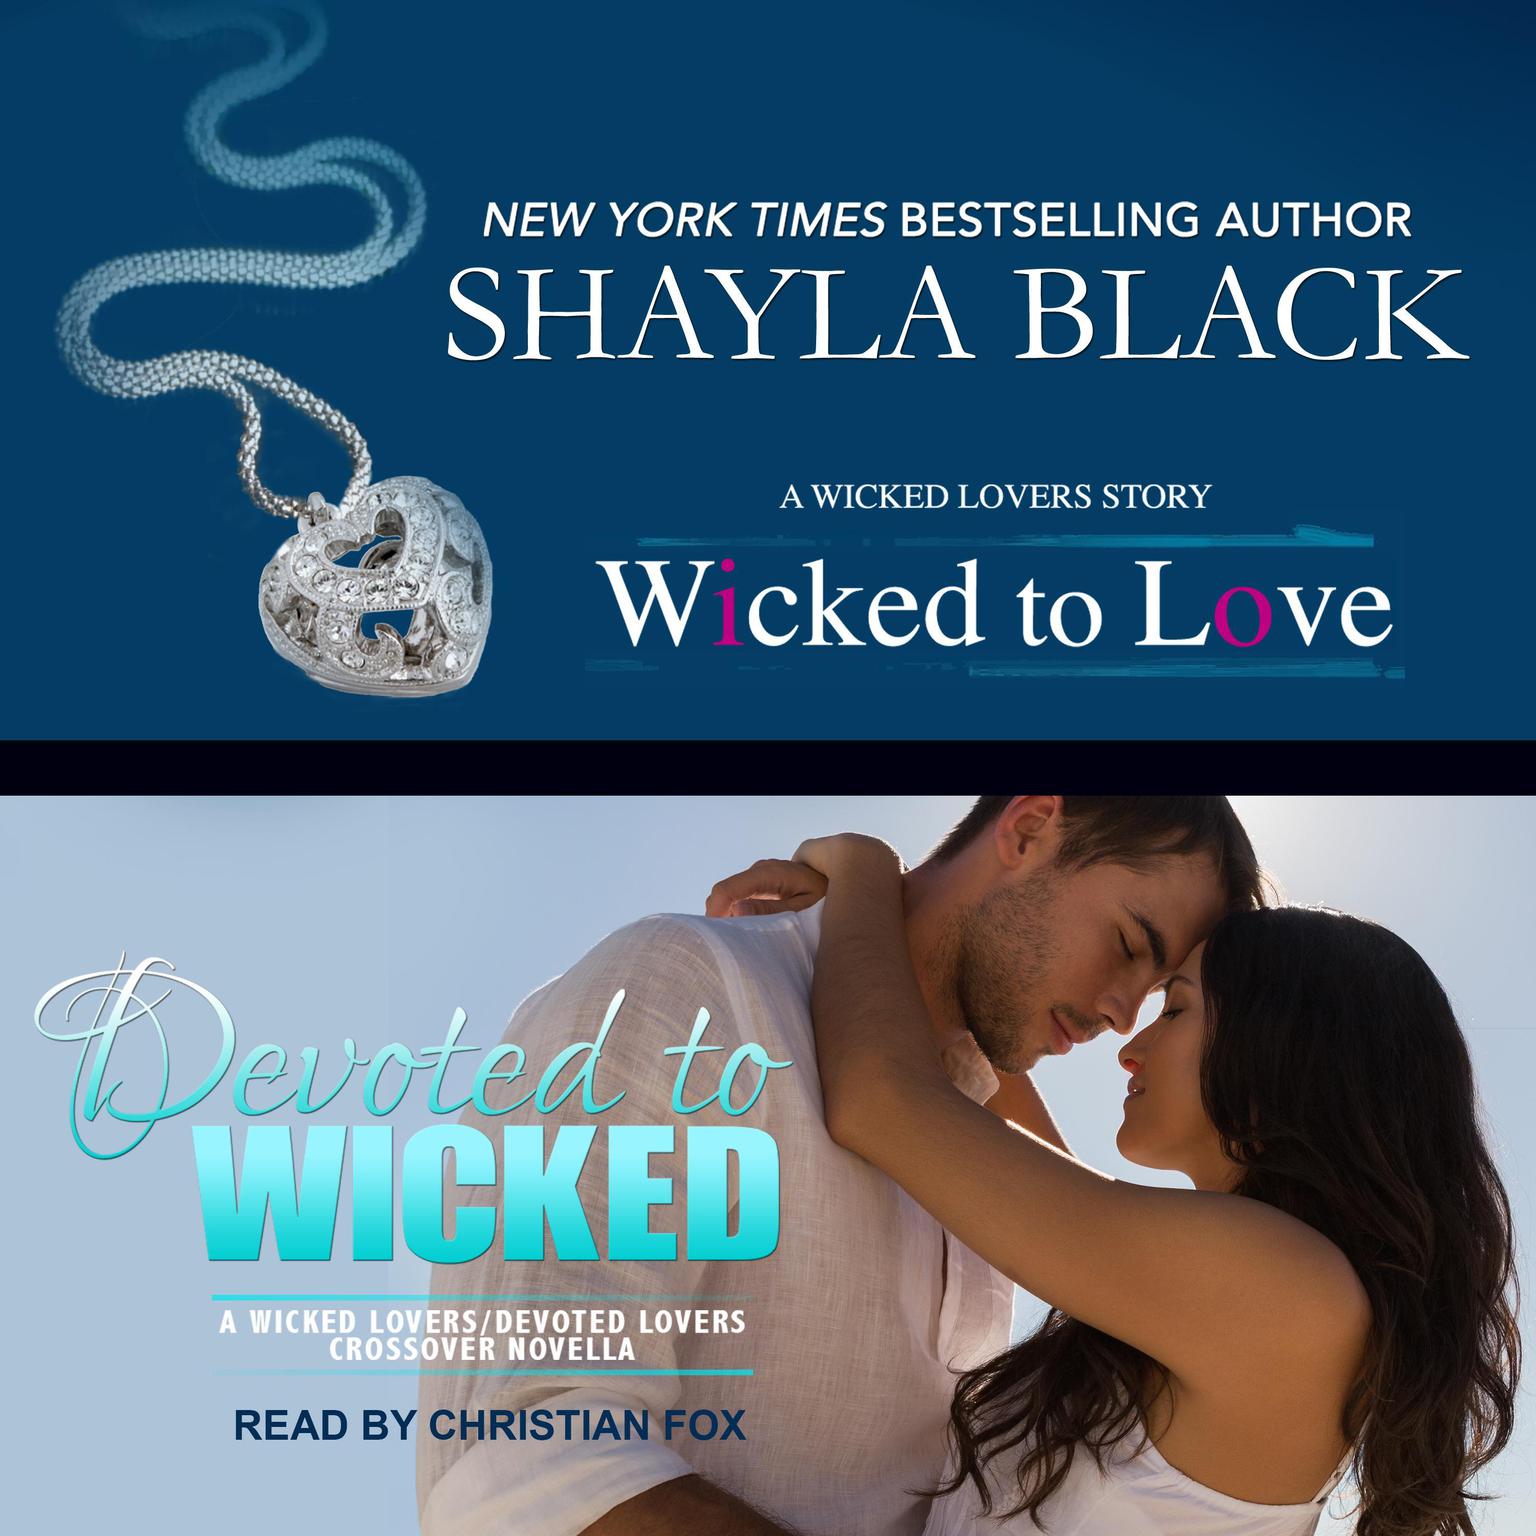 Wicked to Love/Devoted to Wicked Audiobook, by Shayla Black